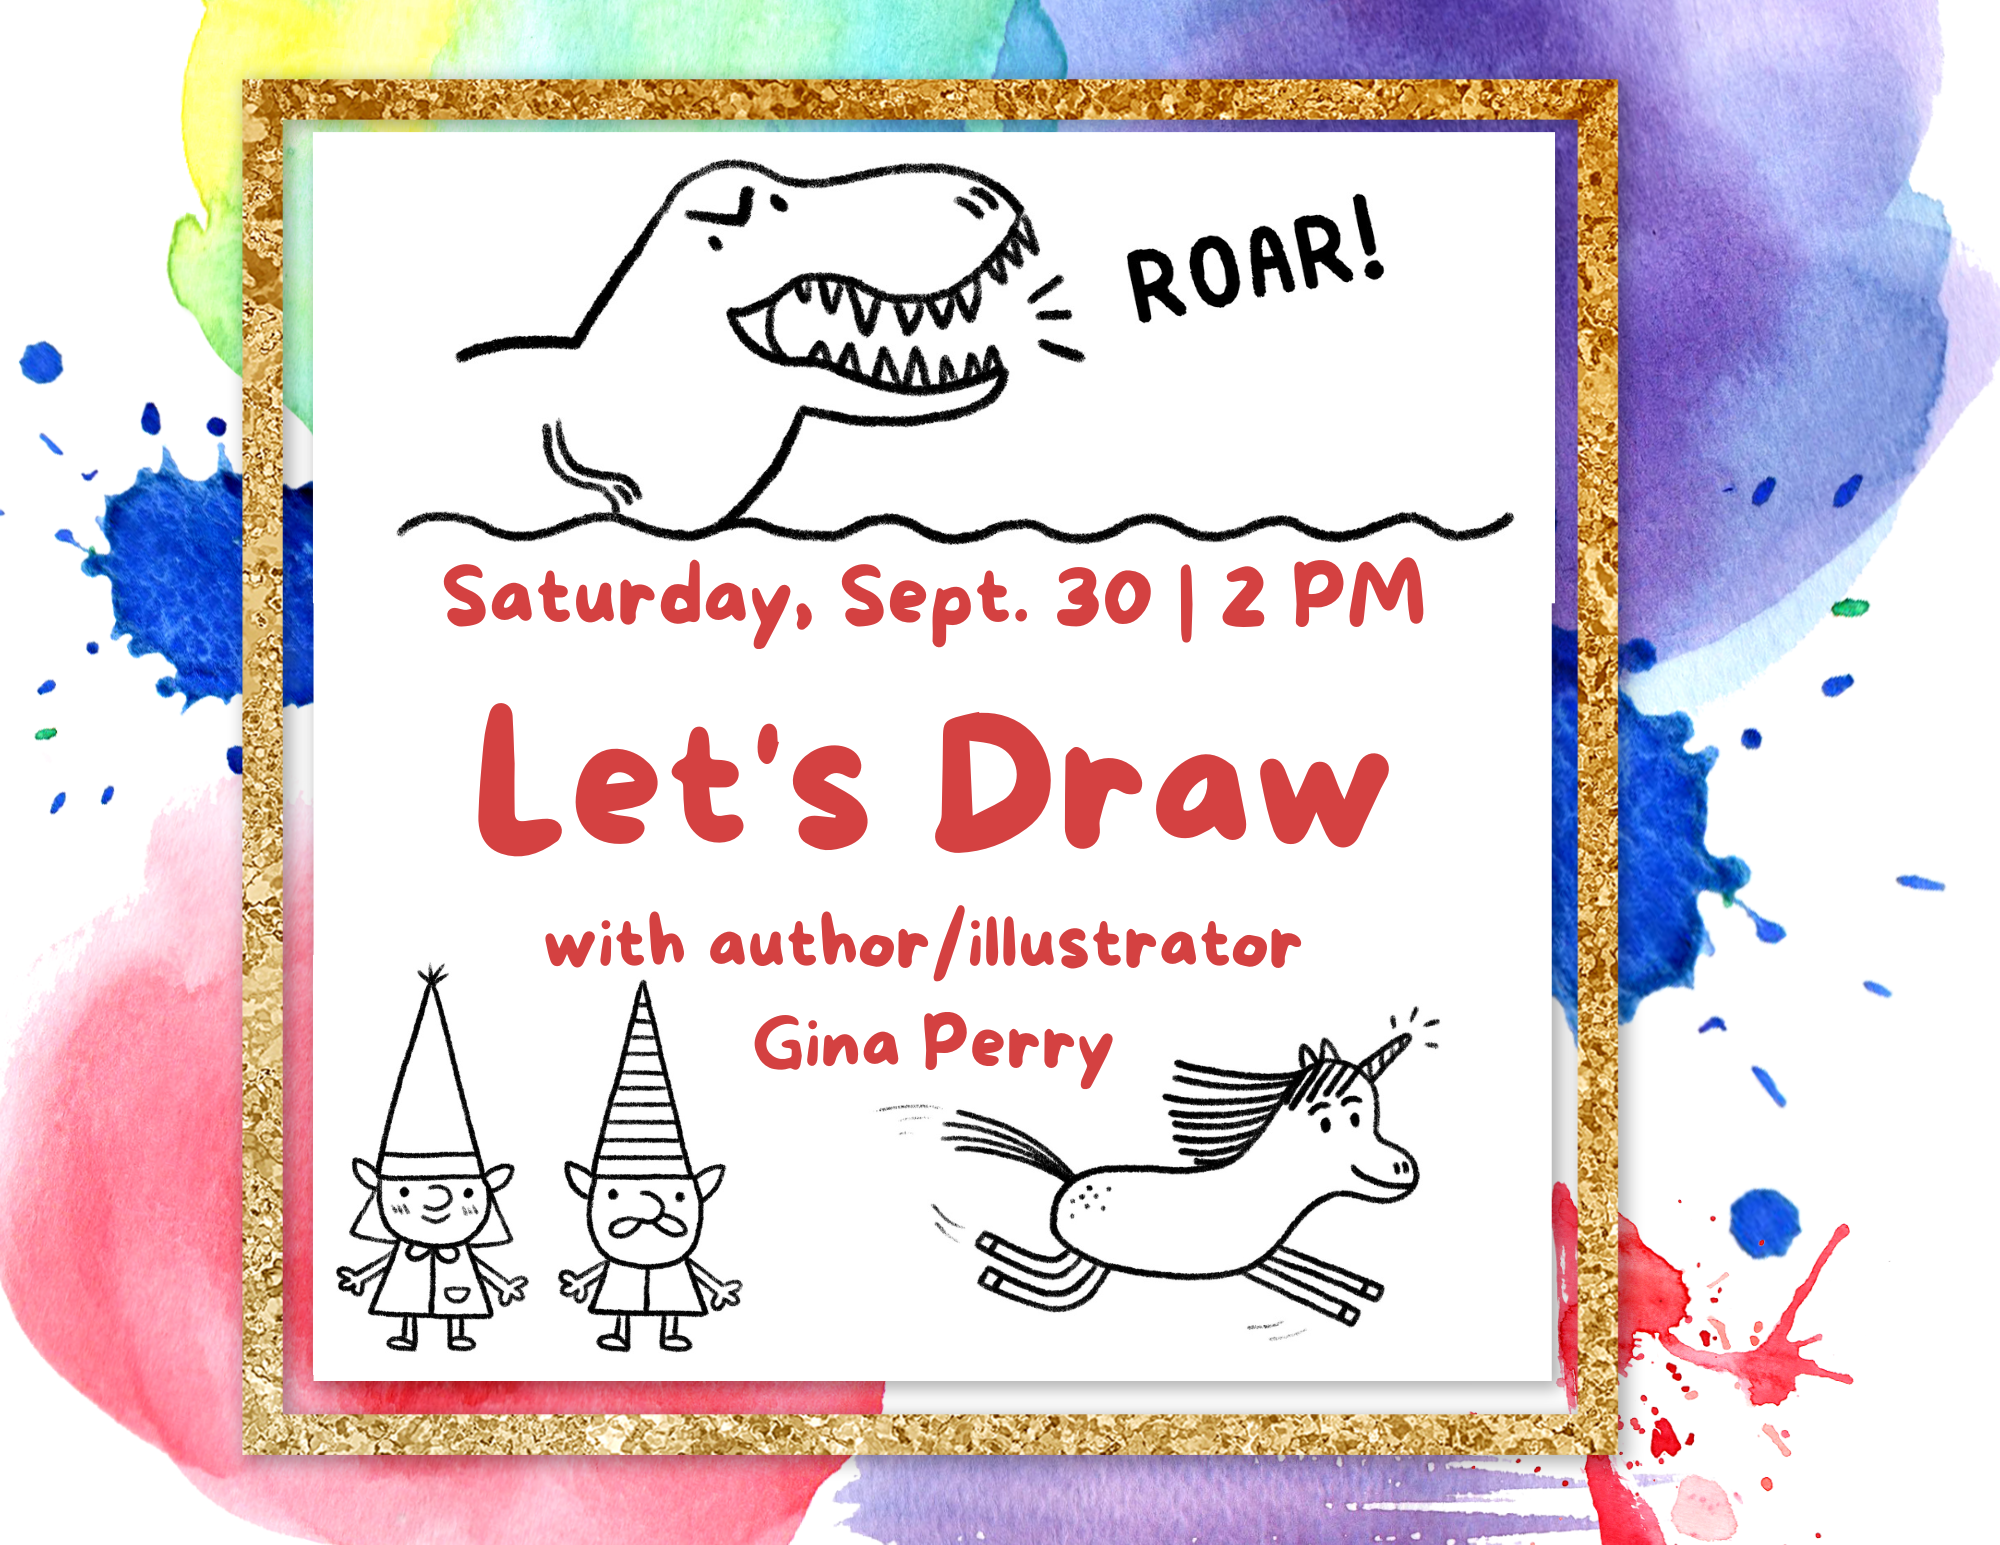 Let's Draw with Gina Perry with images of dino, gnomes and unicorn